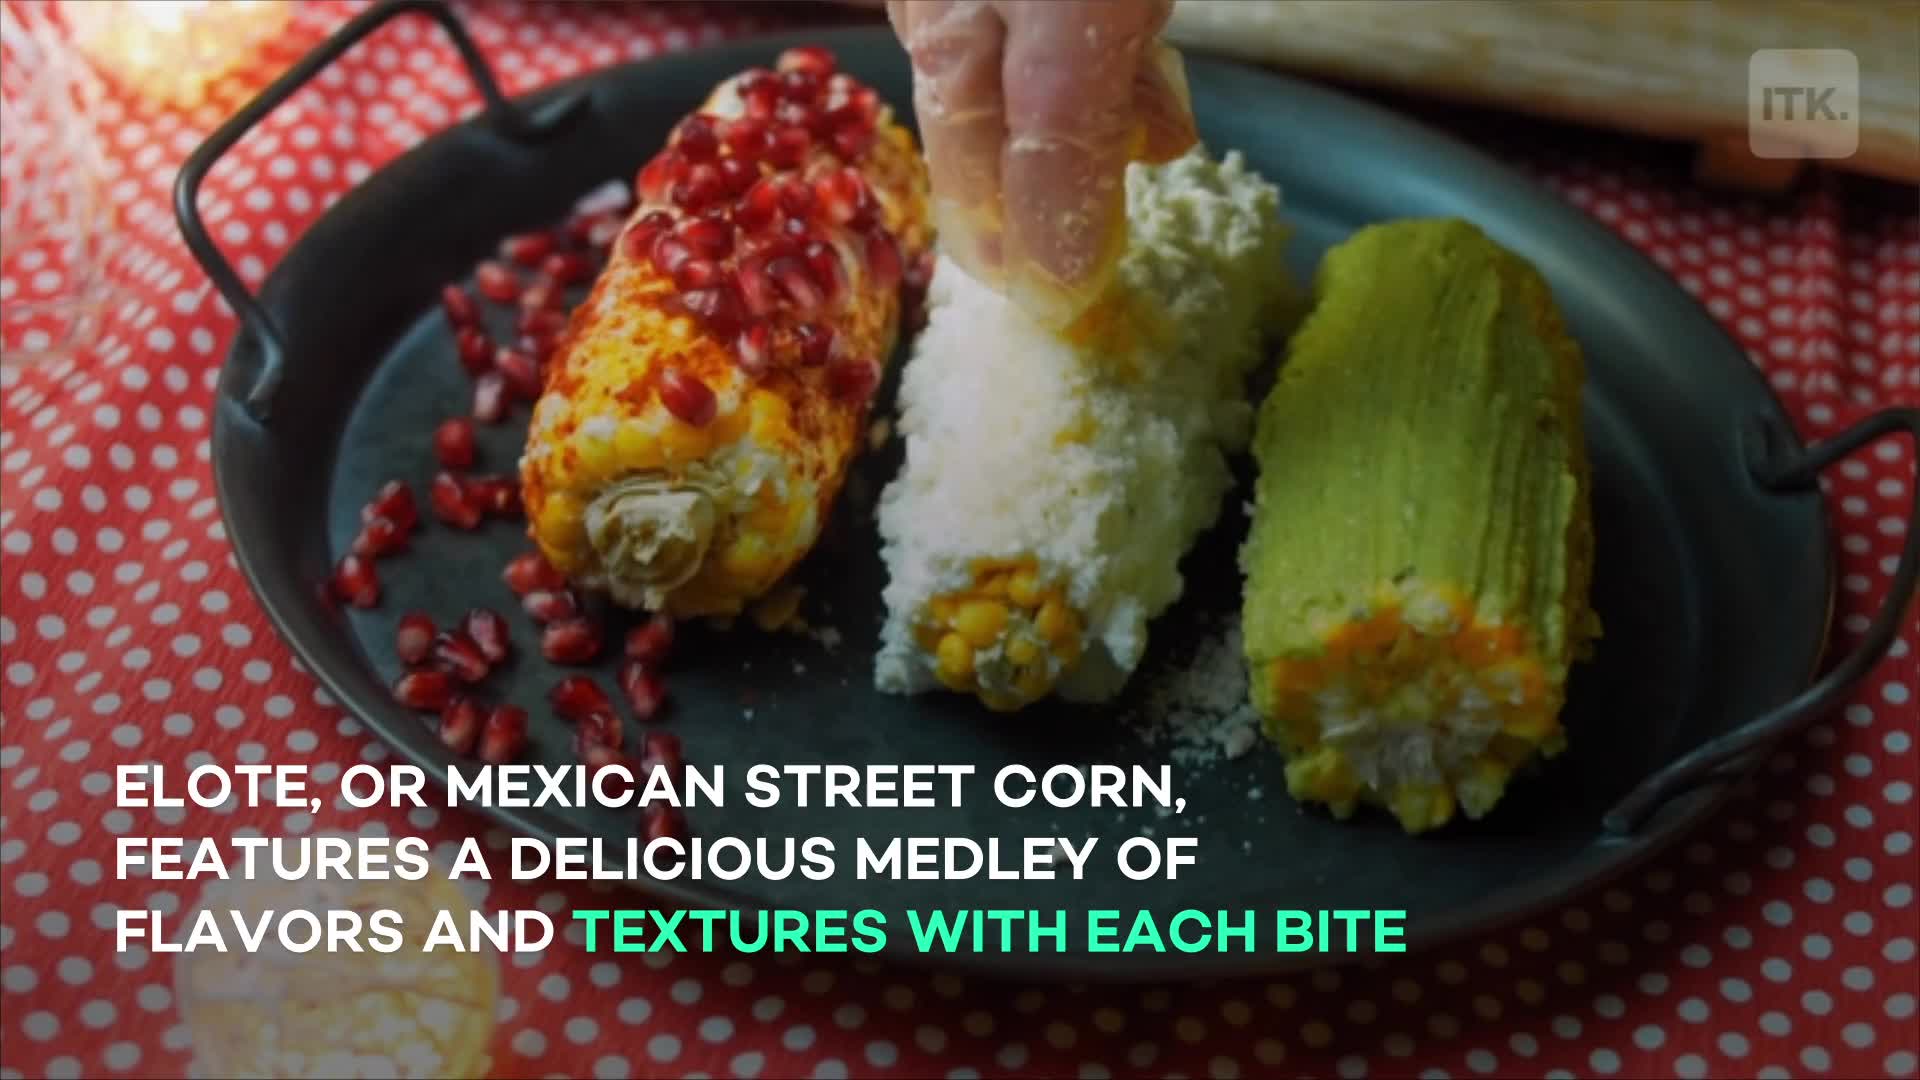 5 flavorful elote (Mexican street corn) recipes